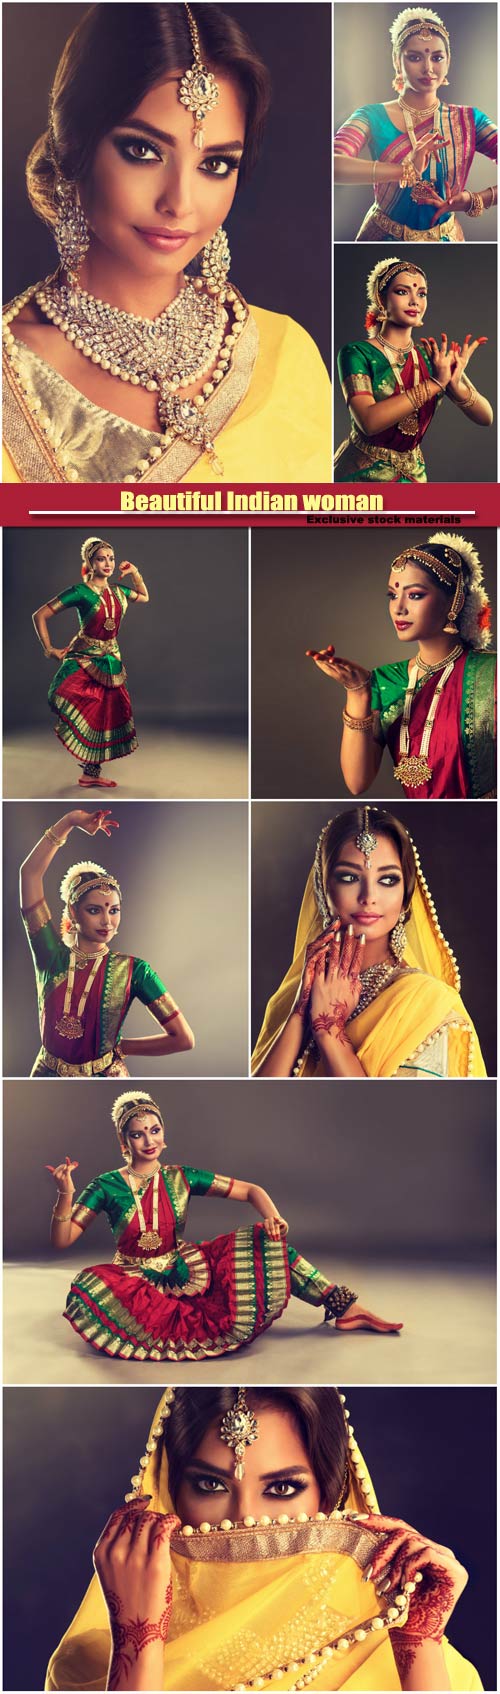 Beautiful Indian woman in traditional dress